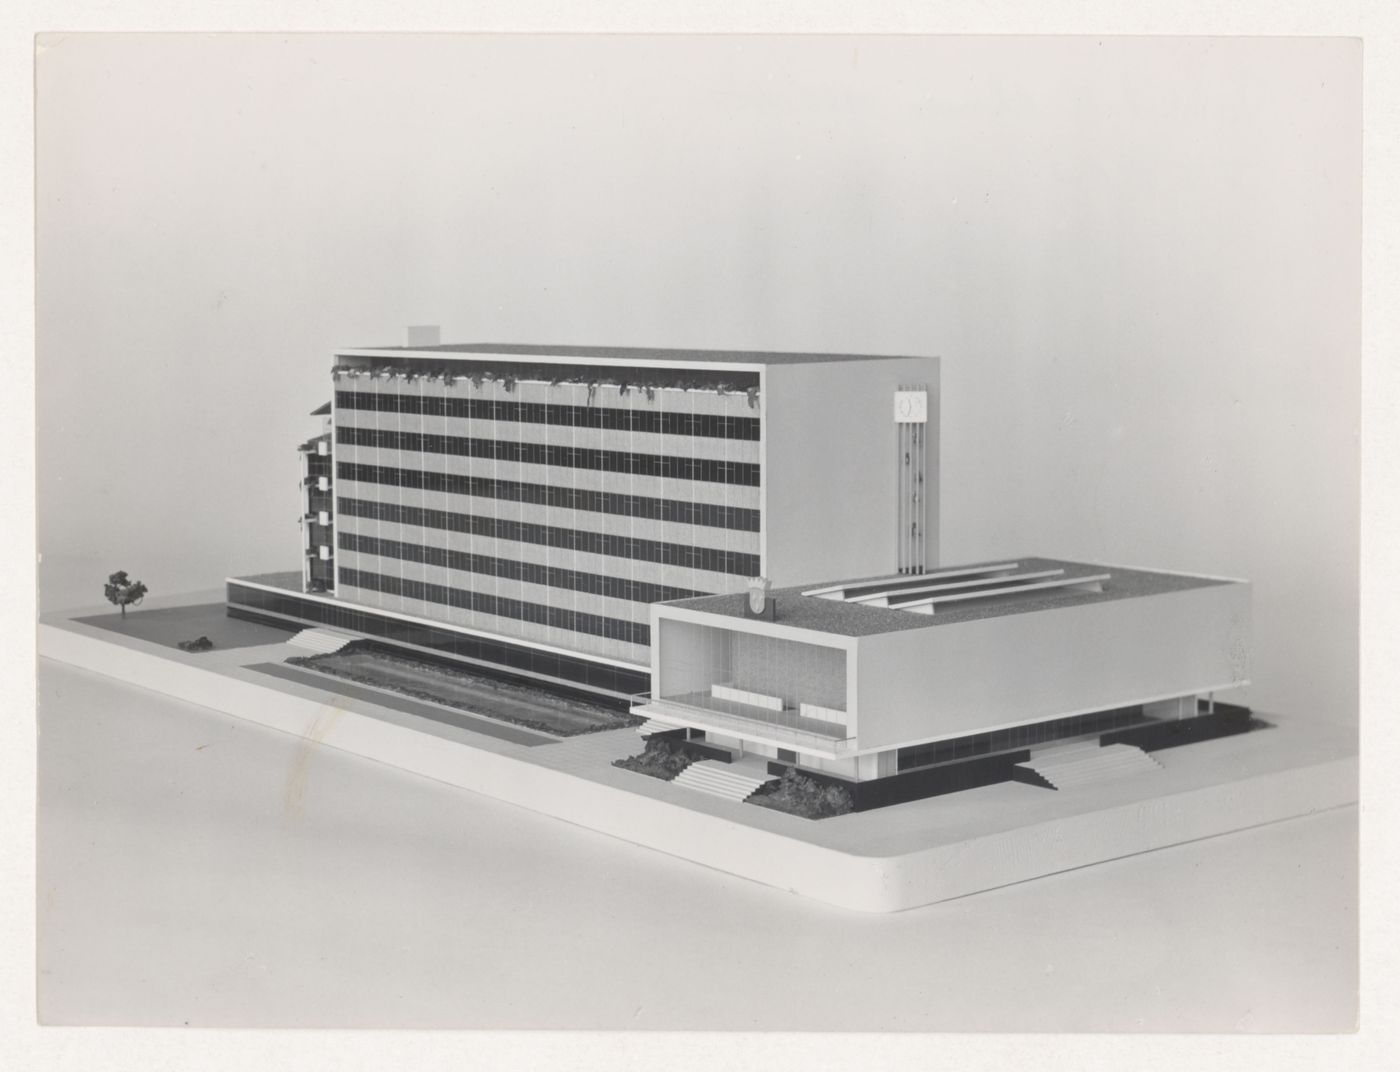 Photograph of a model for Almelo Town Hall, Almelo, Netherlands